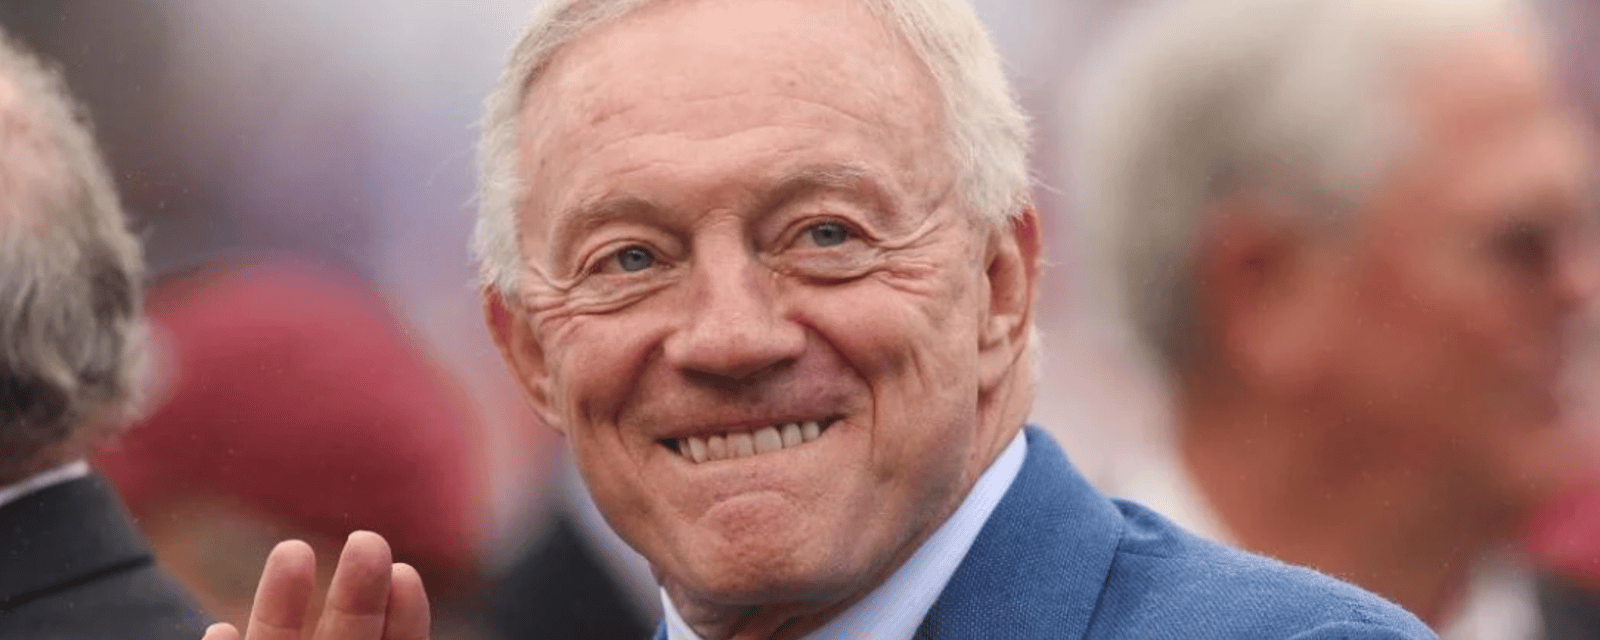 JUST IN: Jerry Jones to sell the Cowboys! 